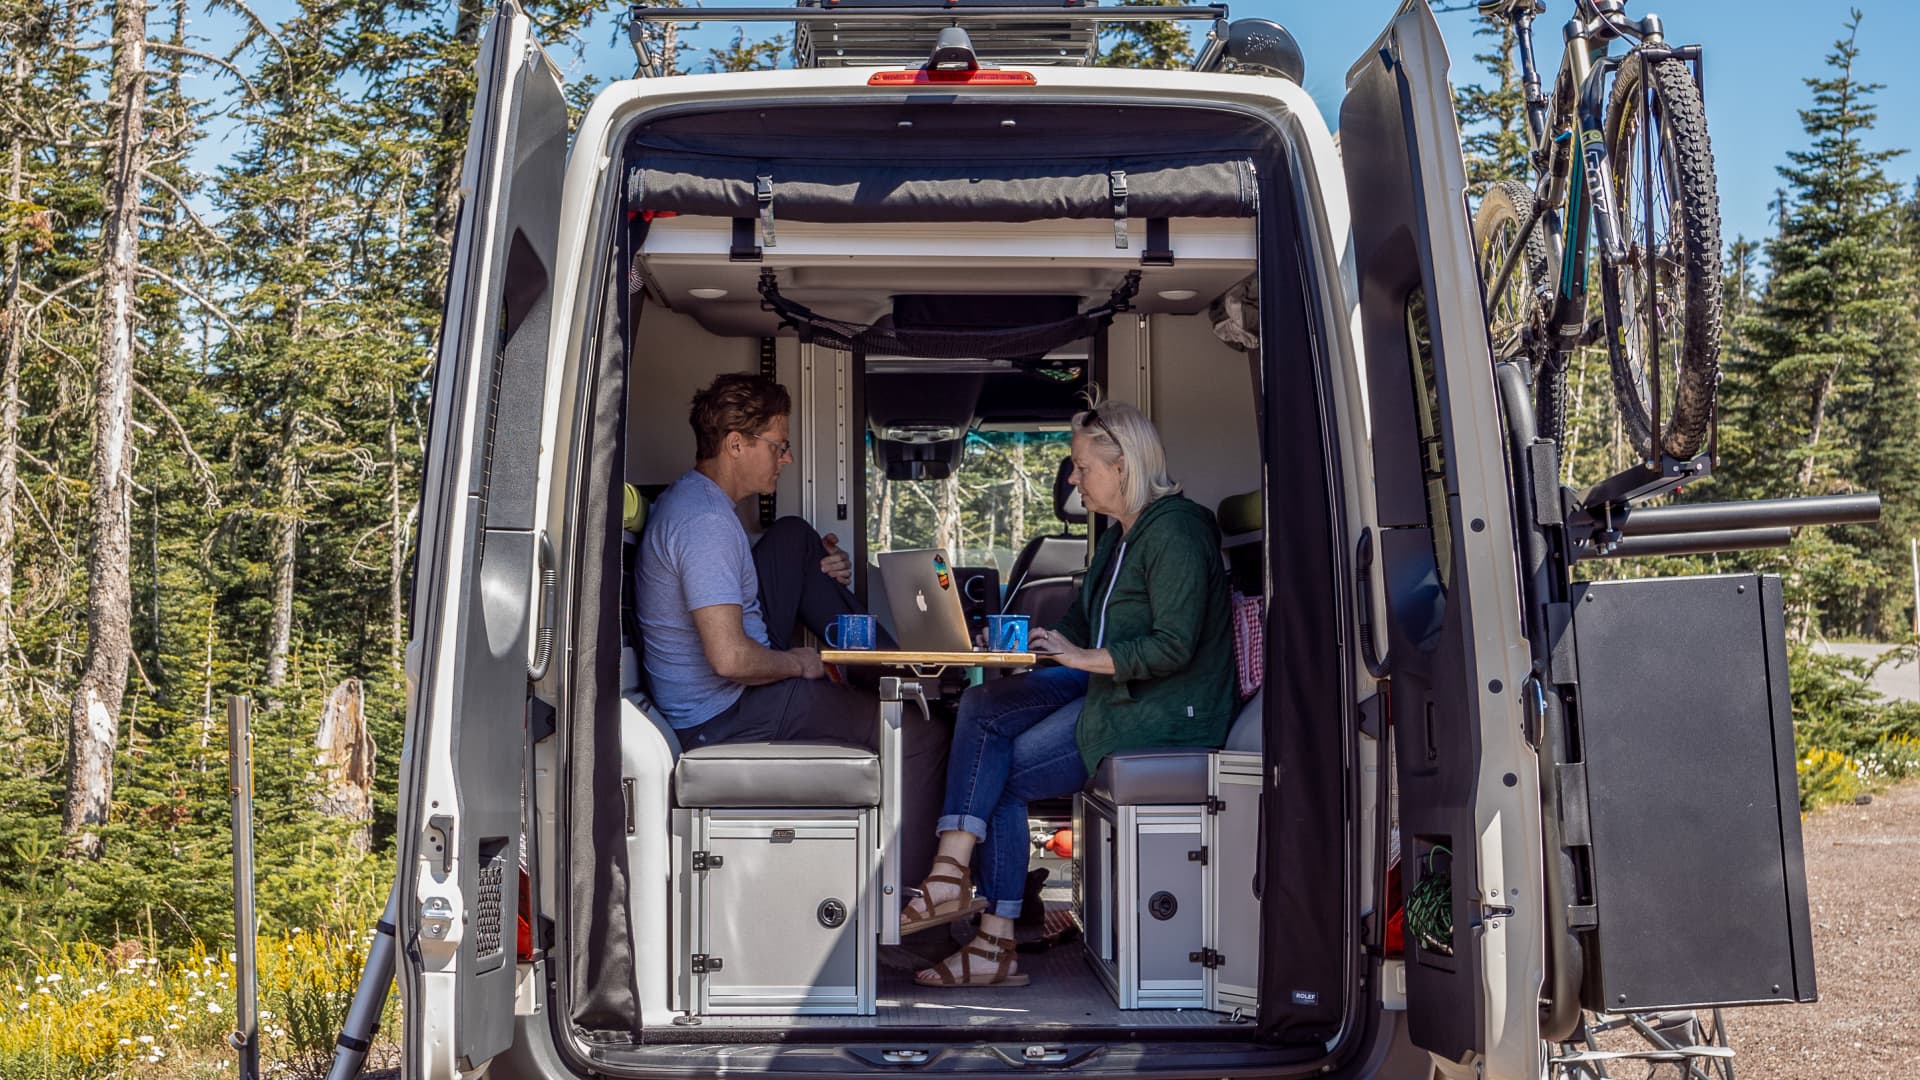 The Dyrt co-founders Kevin Long and Sarah Smith work out of their camper van while traveling around the country.